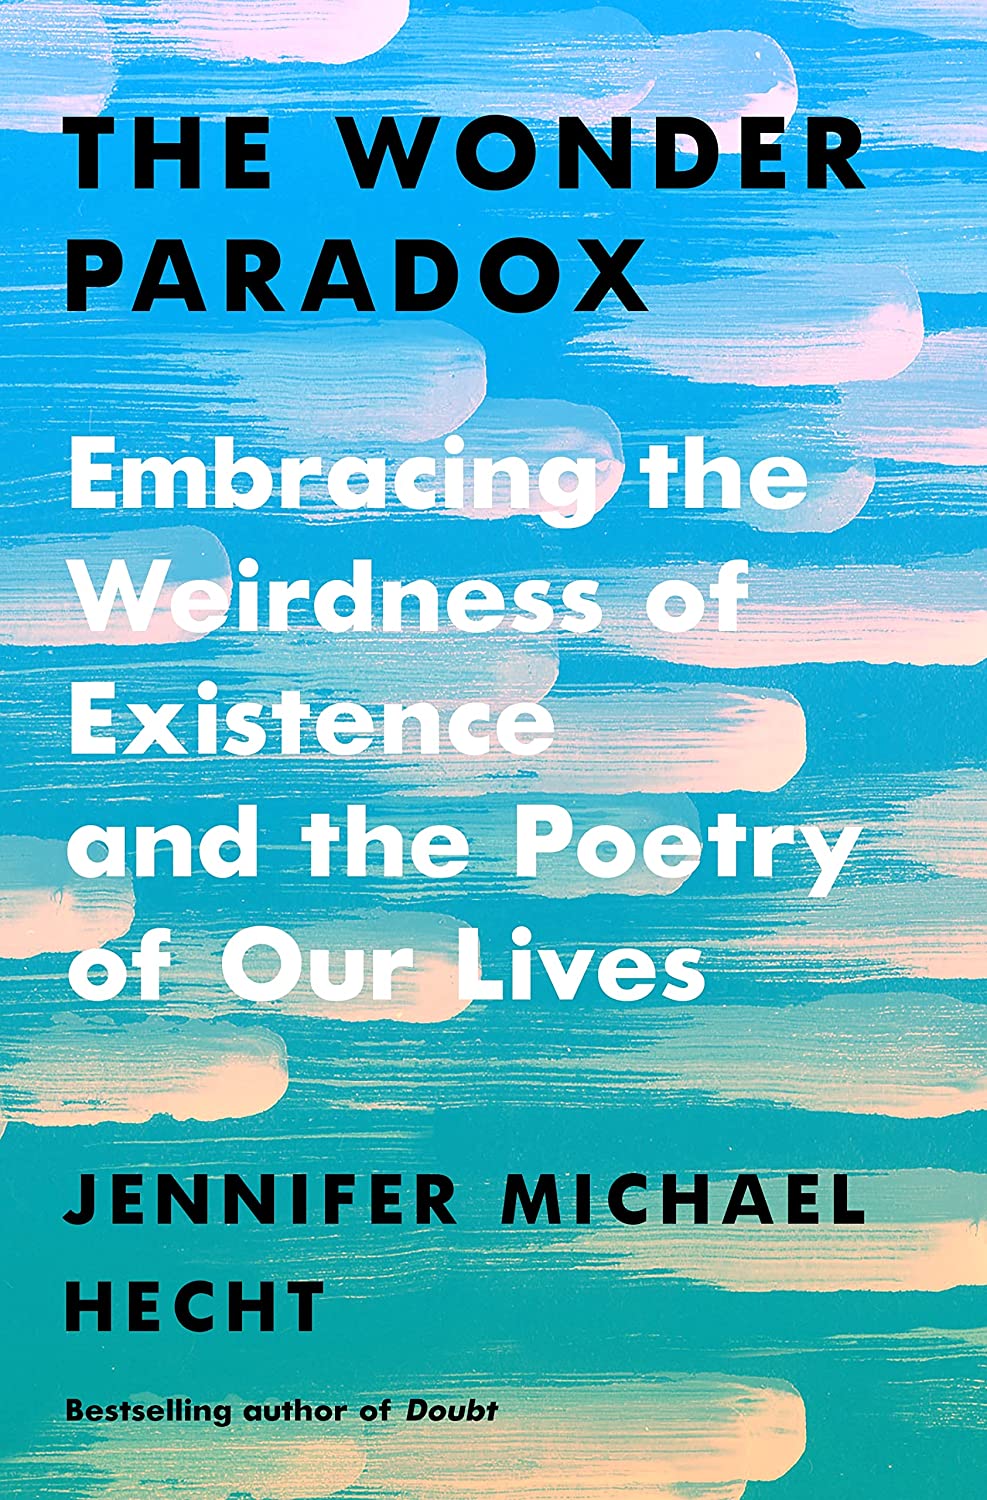 The Wonder Paradox: Embracing the Weirdness of Existence and the Poetry of Our Lives (Hardcover)